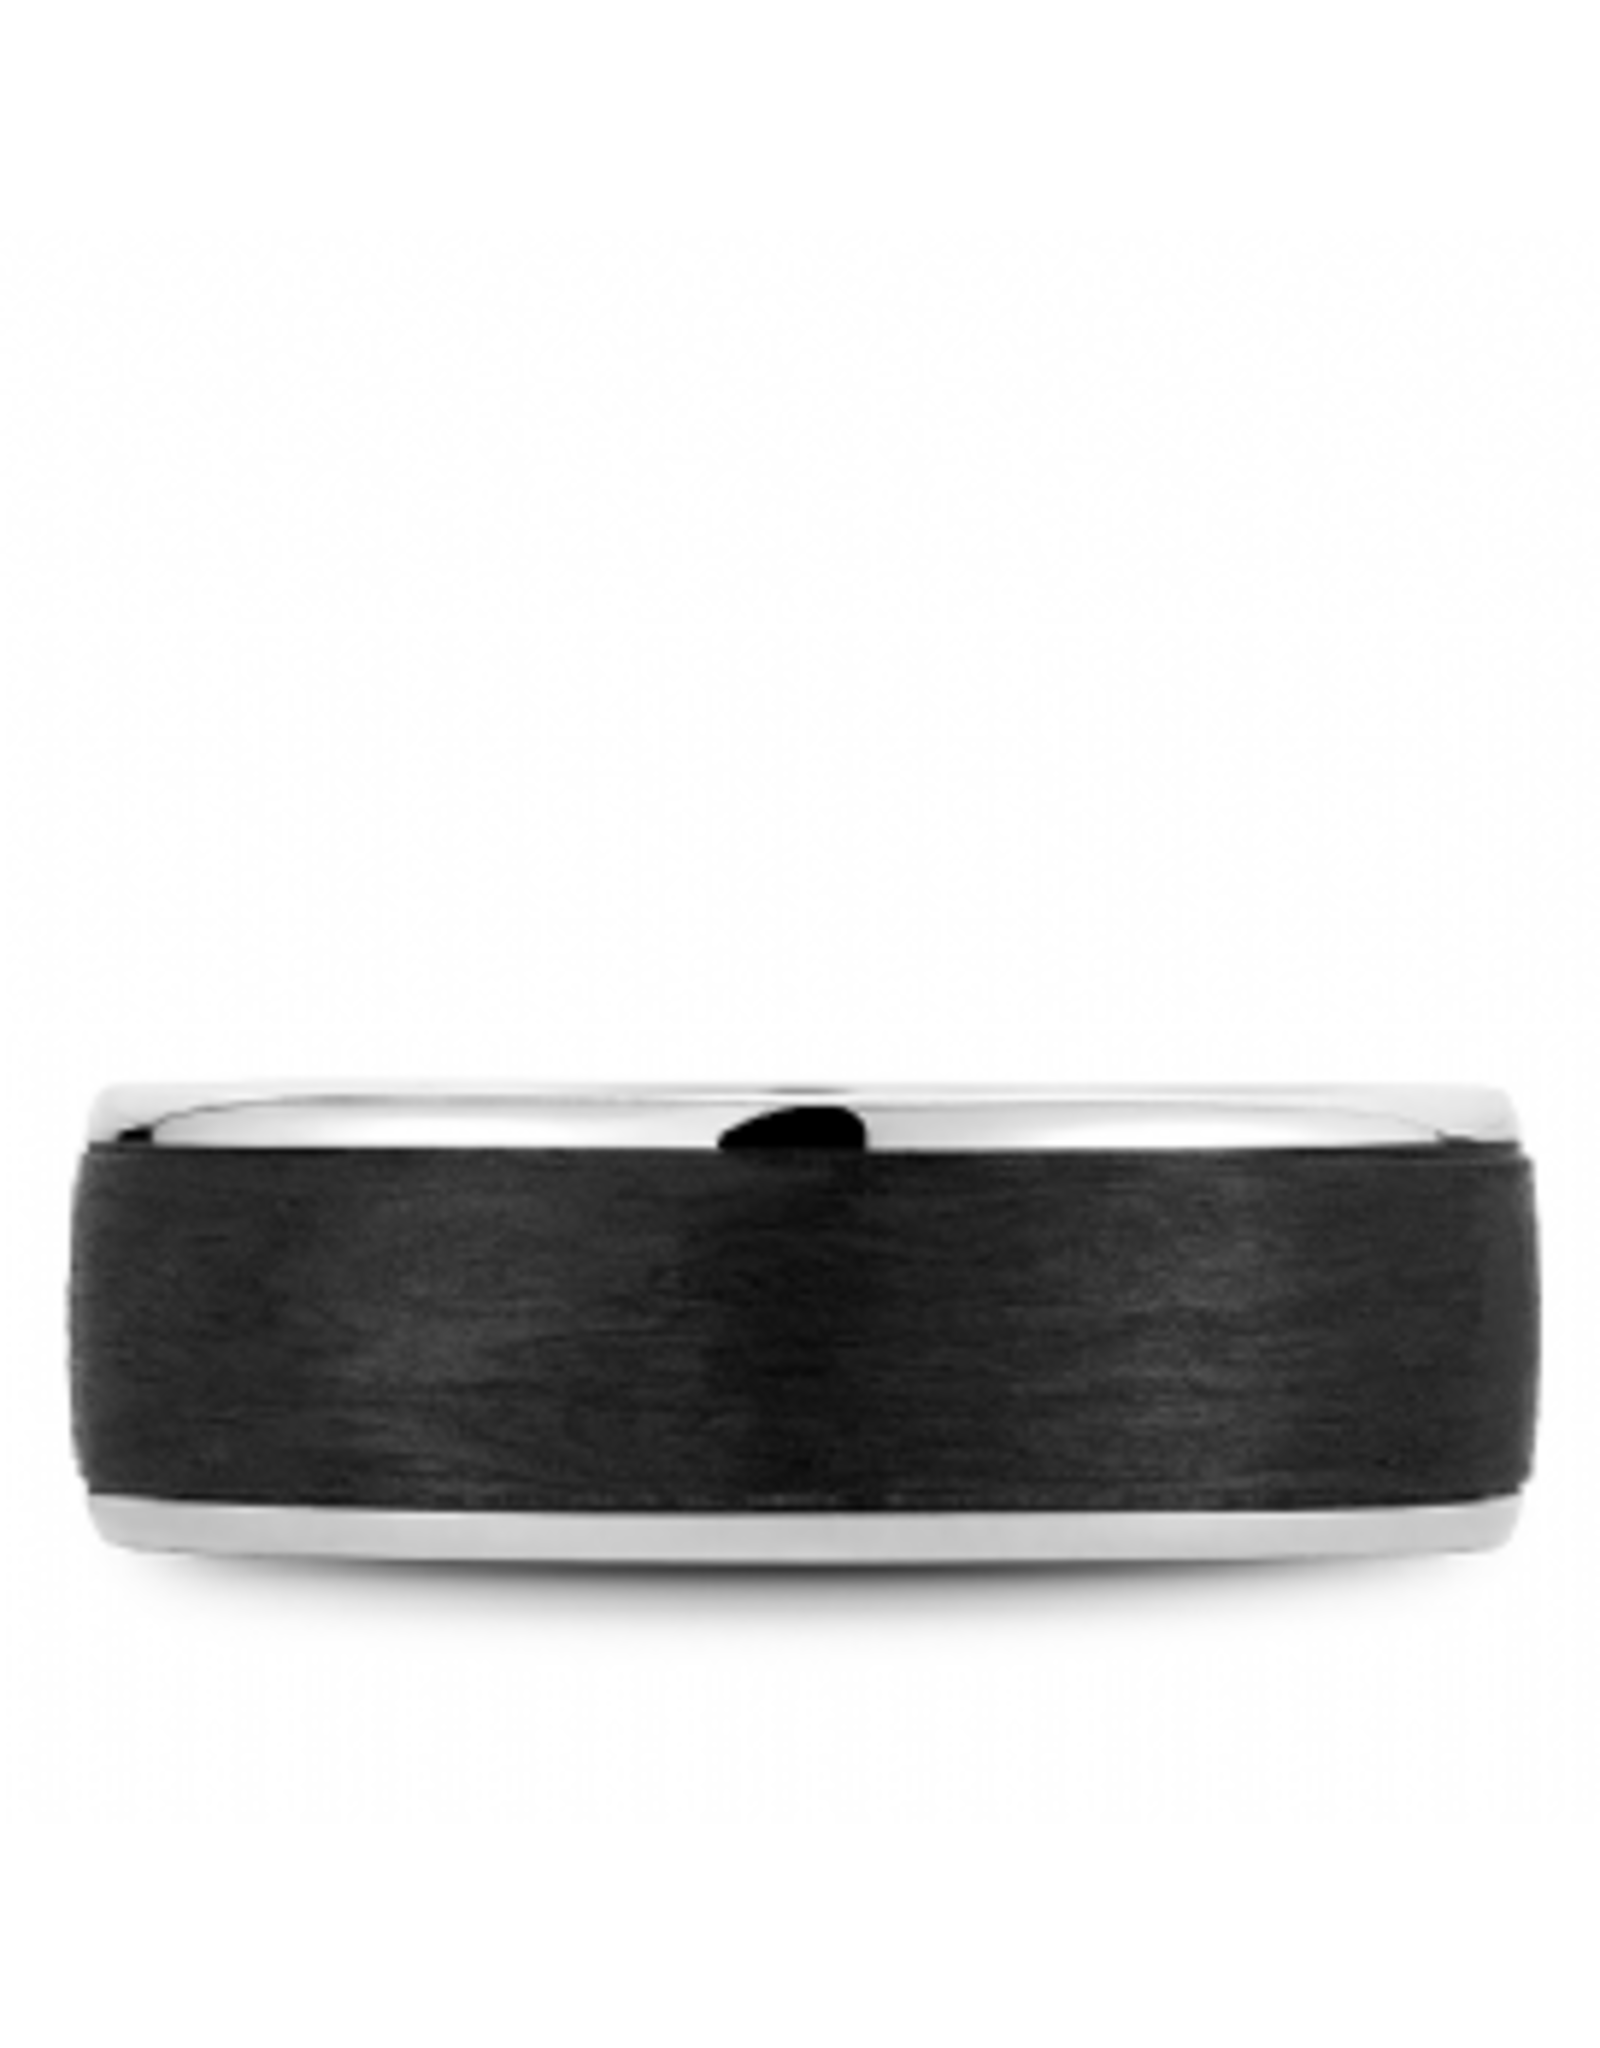 14K White Gold Forged Carbon Fiber Band with High Polished Edges - 7.5mm